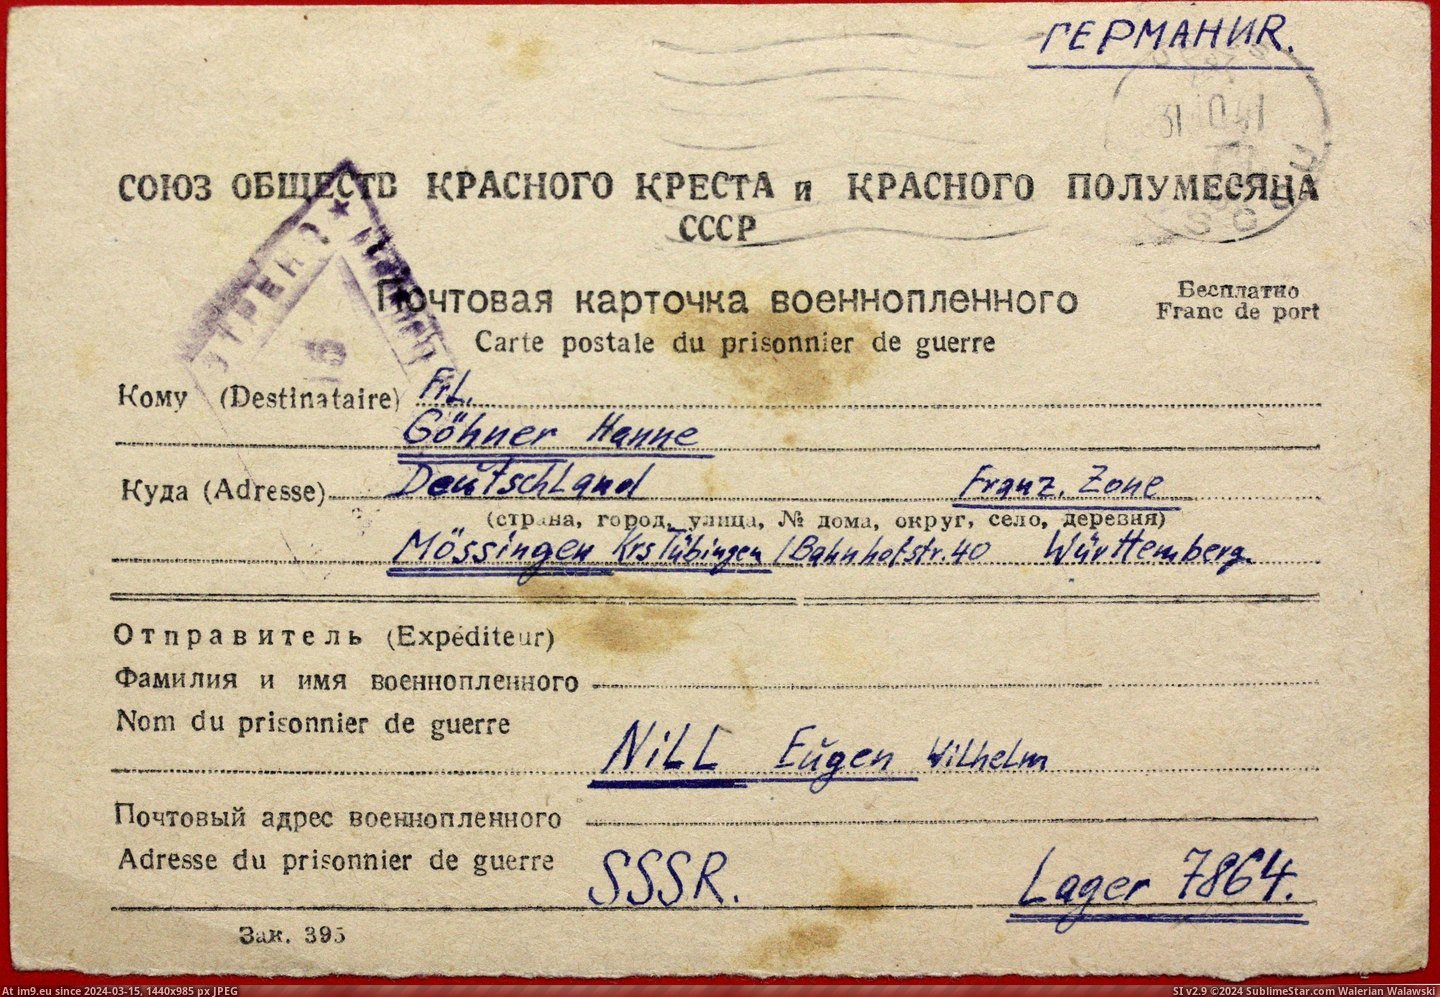 #Grandfather #Allowed #Postcard #Write #Imprisonment #Camp #Soviet [Pics] During my grandfather's imprisonment in a Soviet POW camp, he was only allowed to write the occasional postcard to his fi Pic. (Bild von album My r/PICS favs))